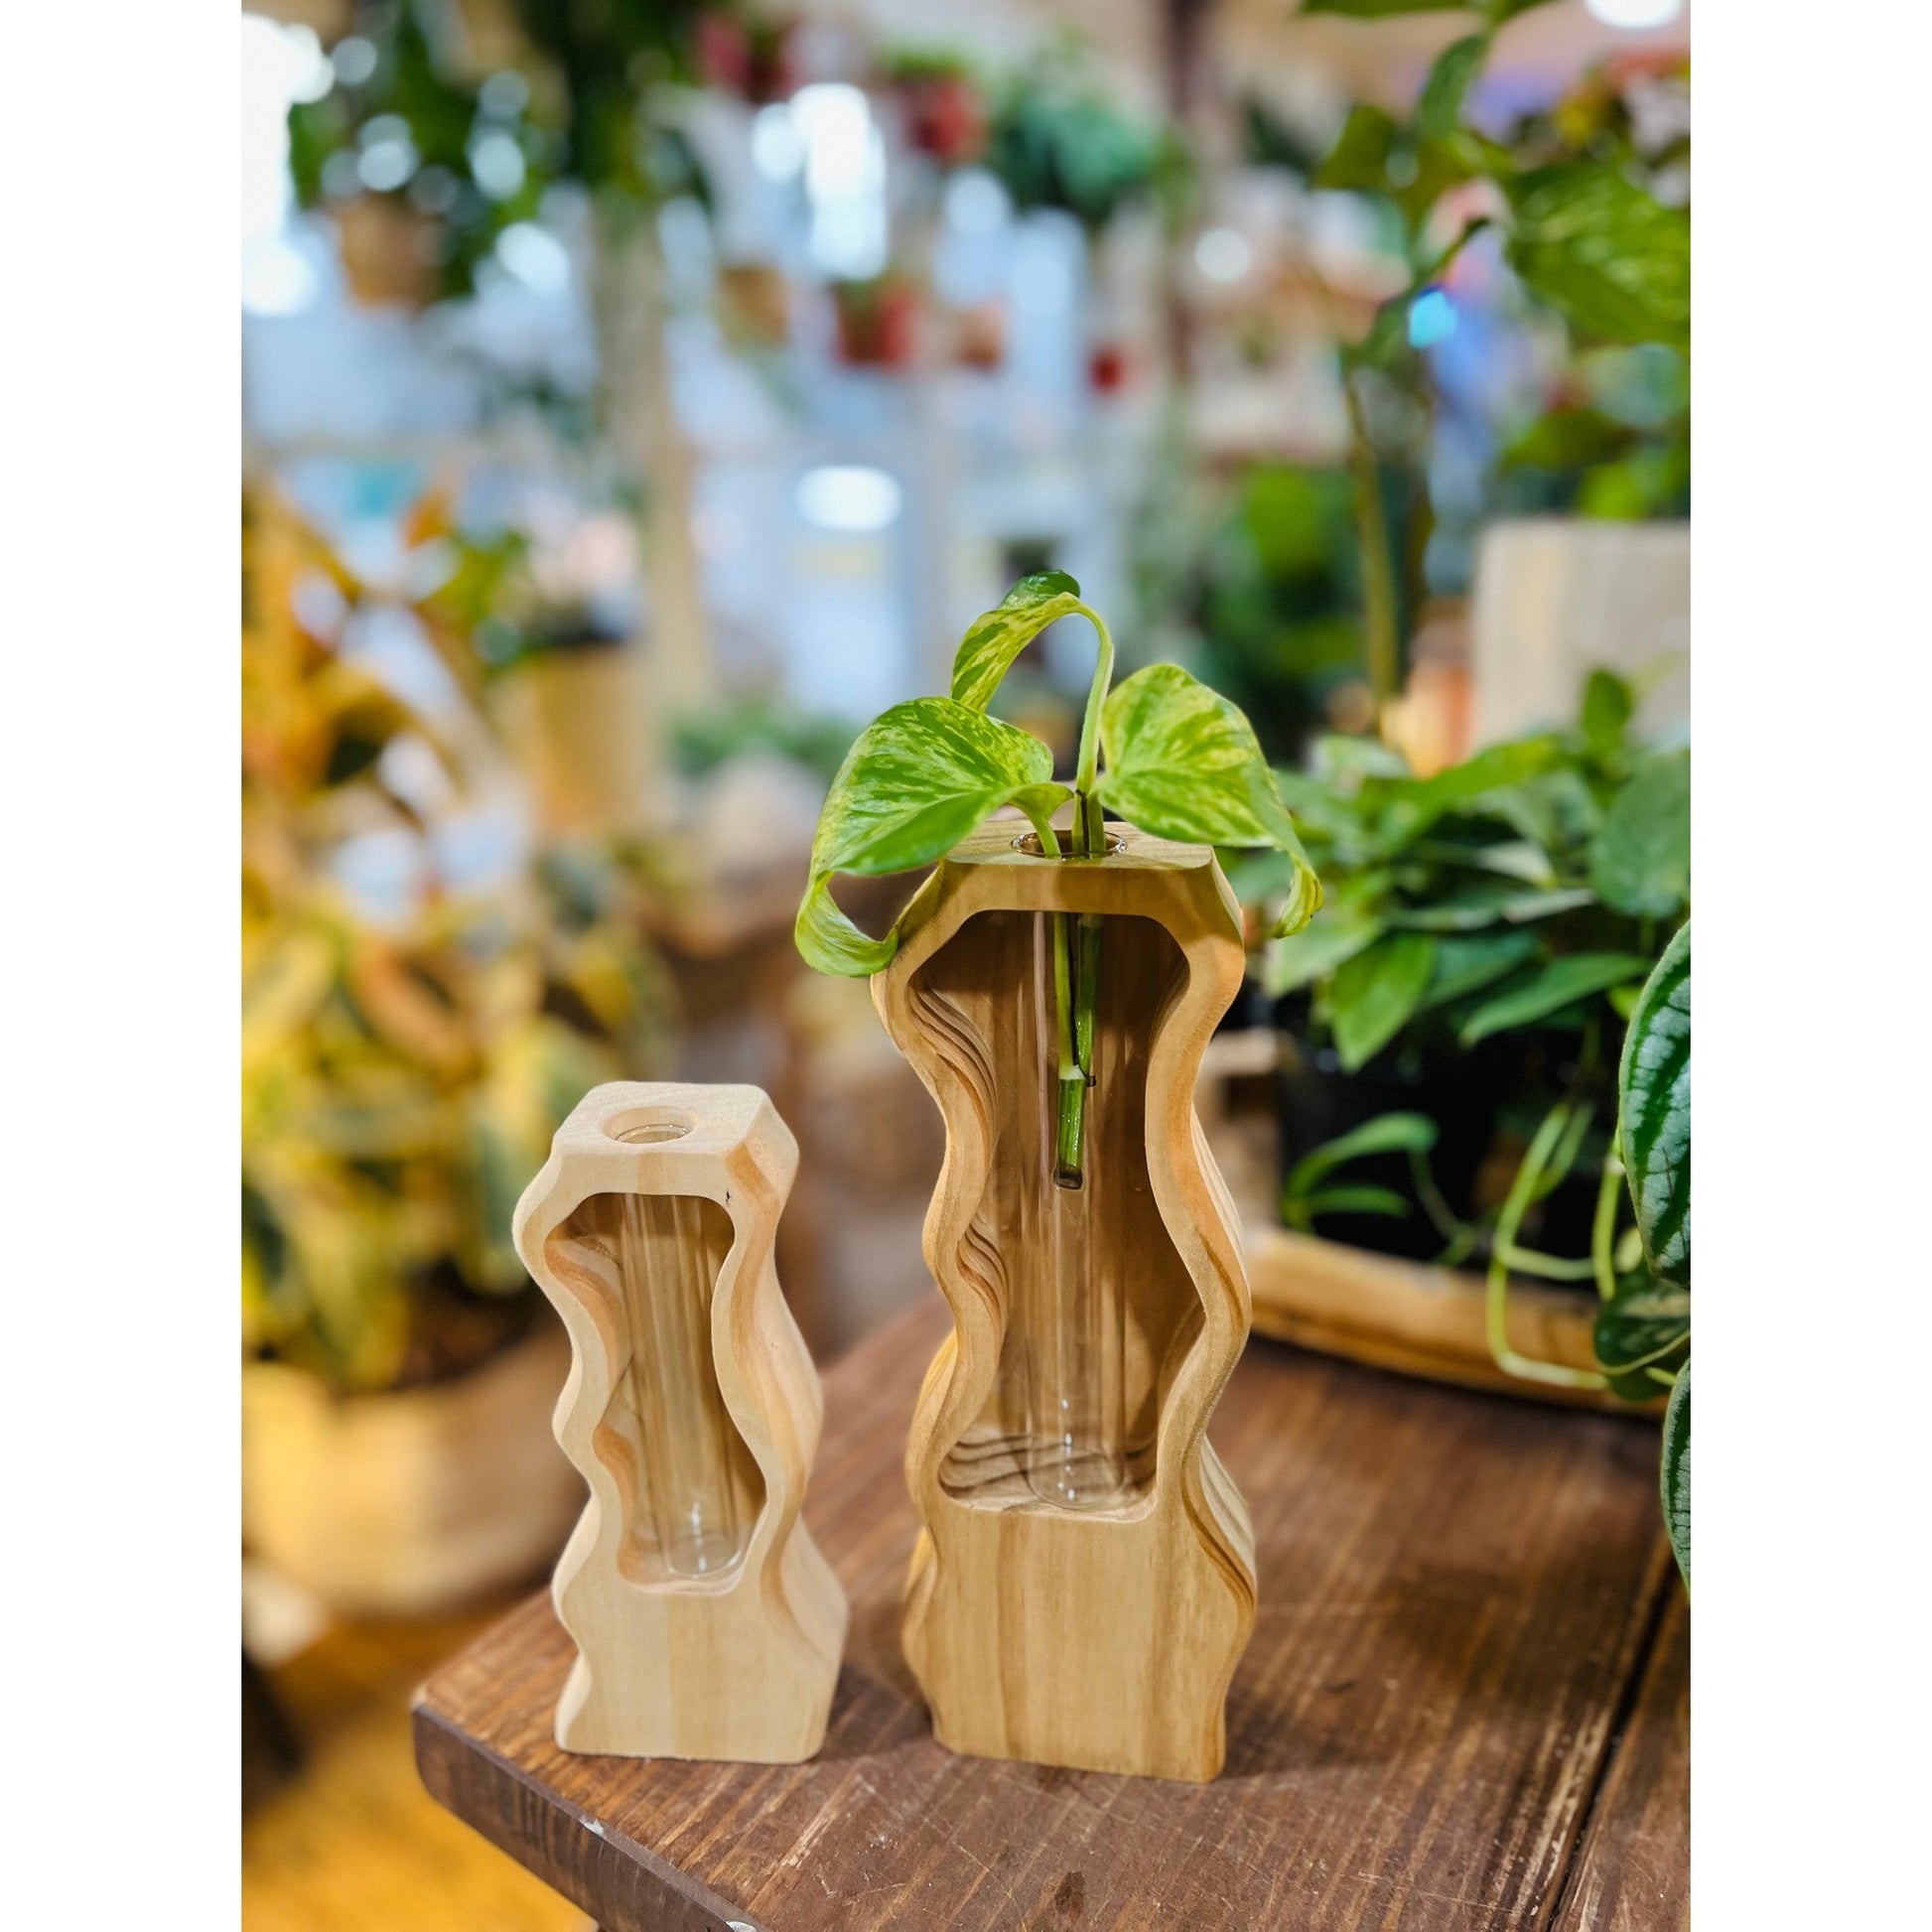 Curvy wood propagation stand-available at Hidden Seed Plant Shop